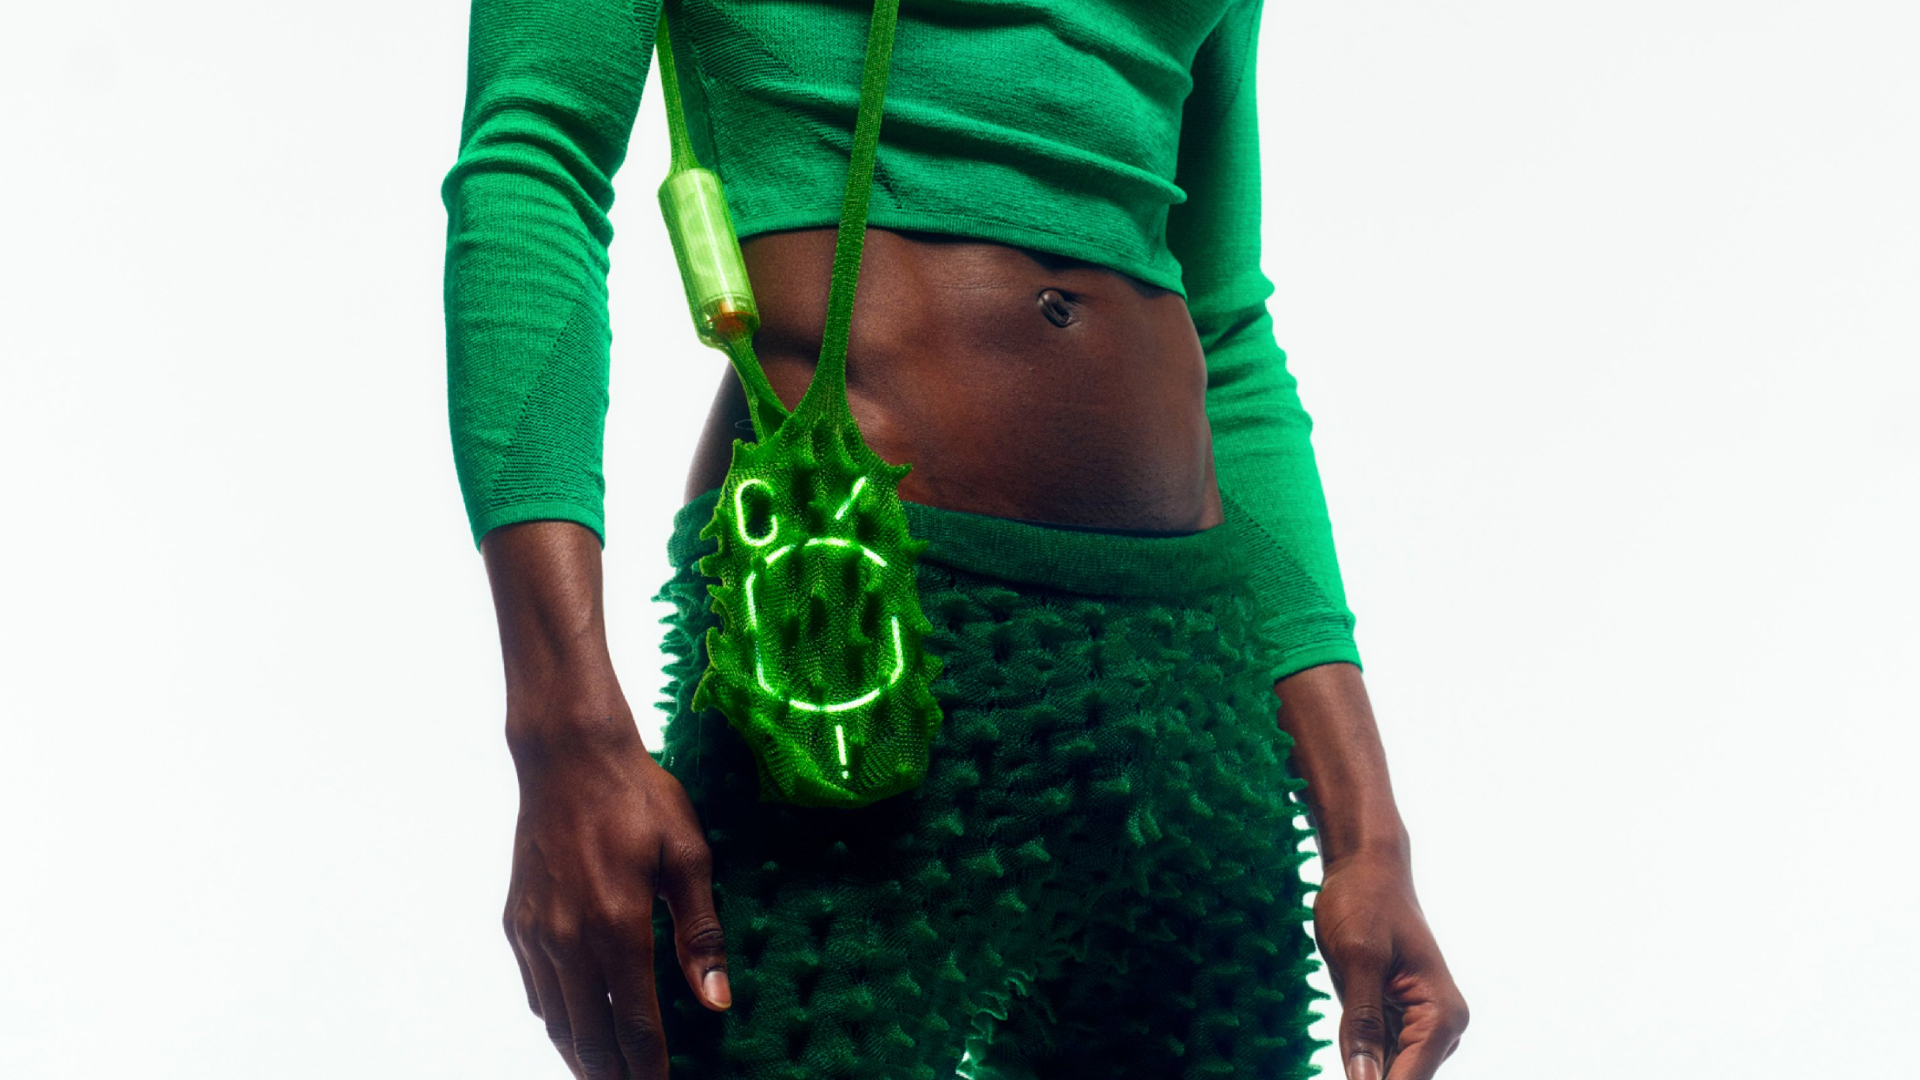 Nothing Ear (stick) carried in a green bag, slung over a model's shoulder, on a white background